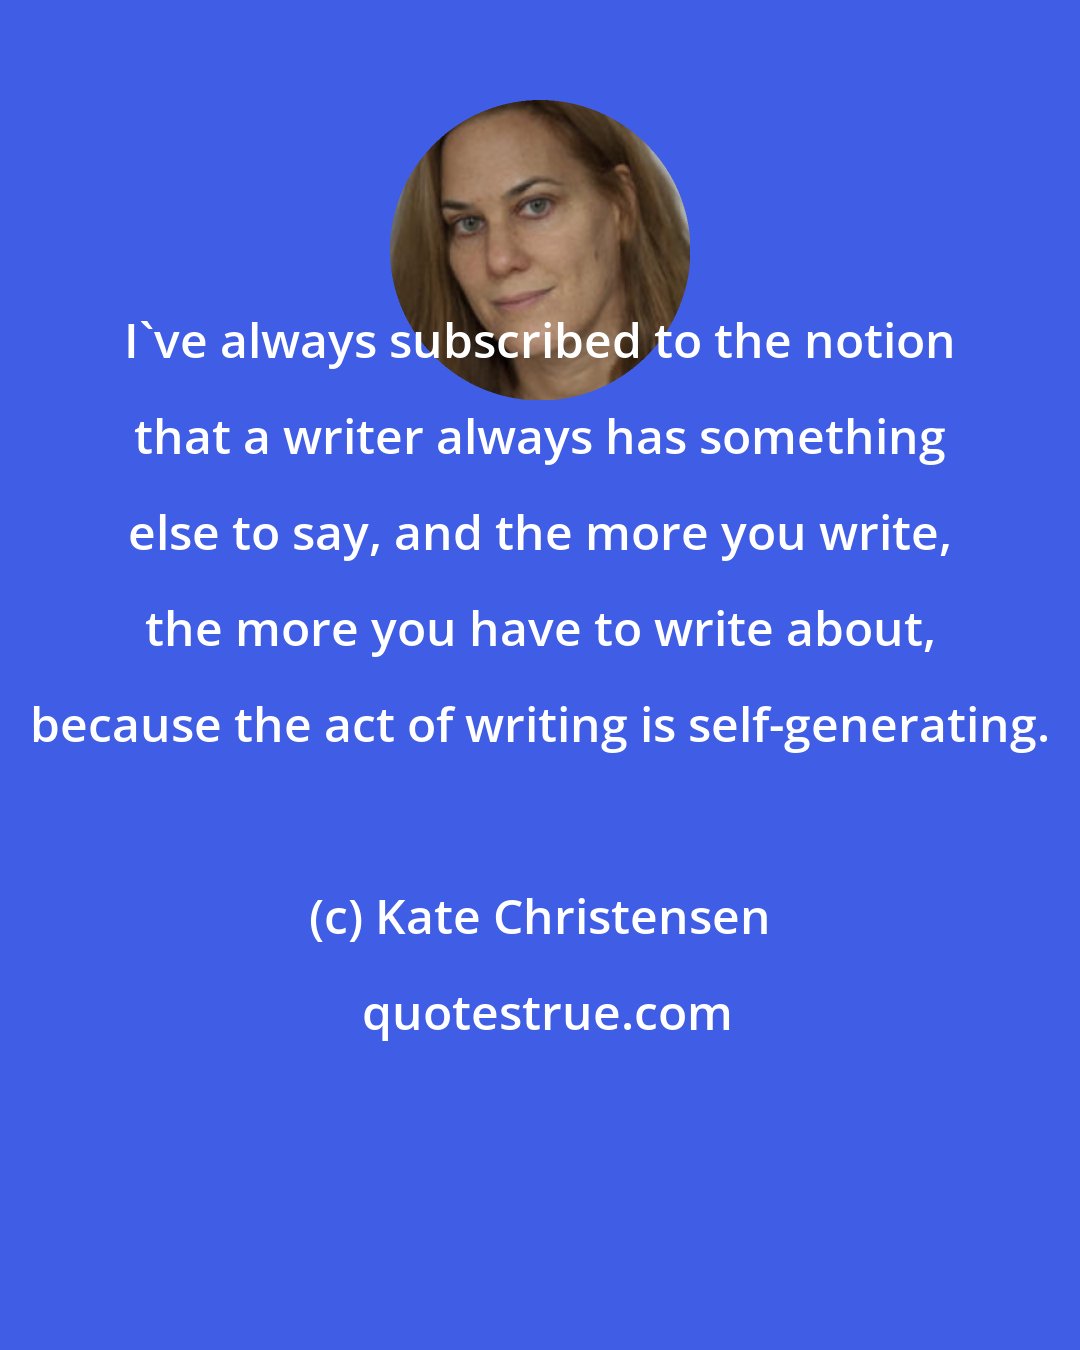 Kate Christensen: I've always subscribed to the notion that a writer always has something else to say, and the more you write, the more you have to write about, because the act of writing is self-generating.